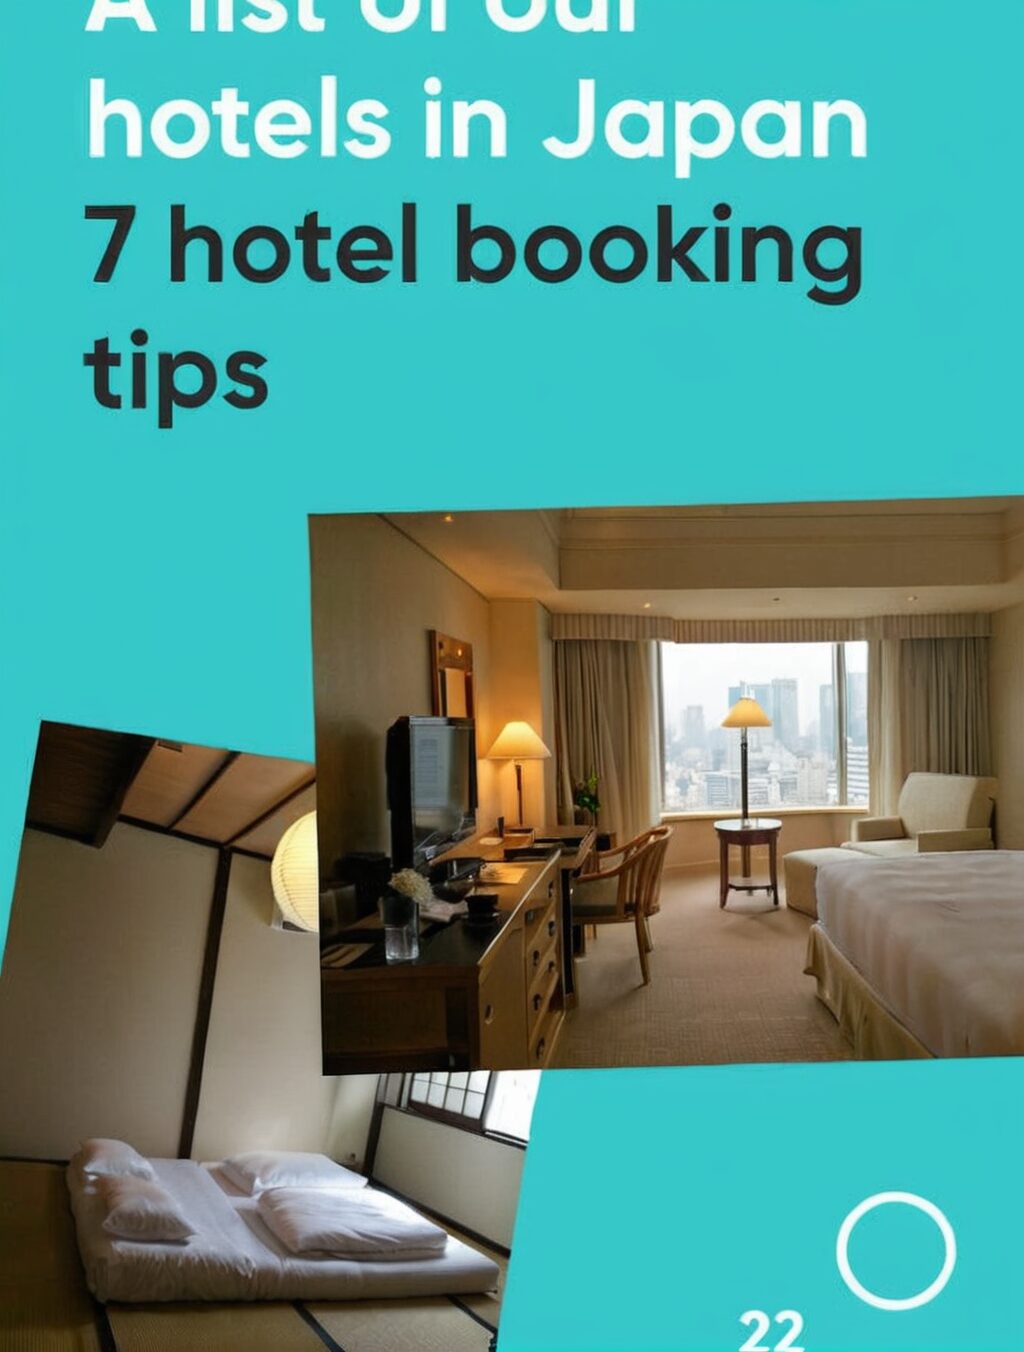 how to book hotel in japan without credit card